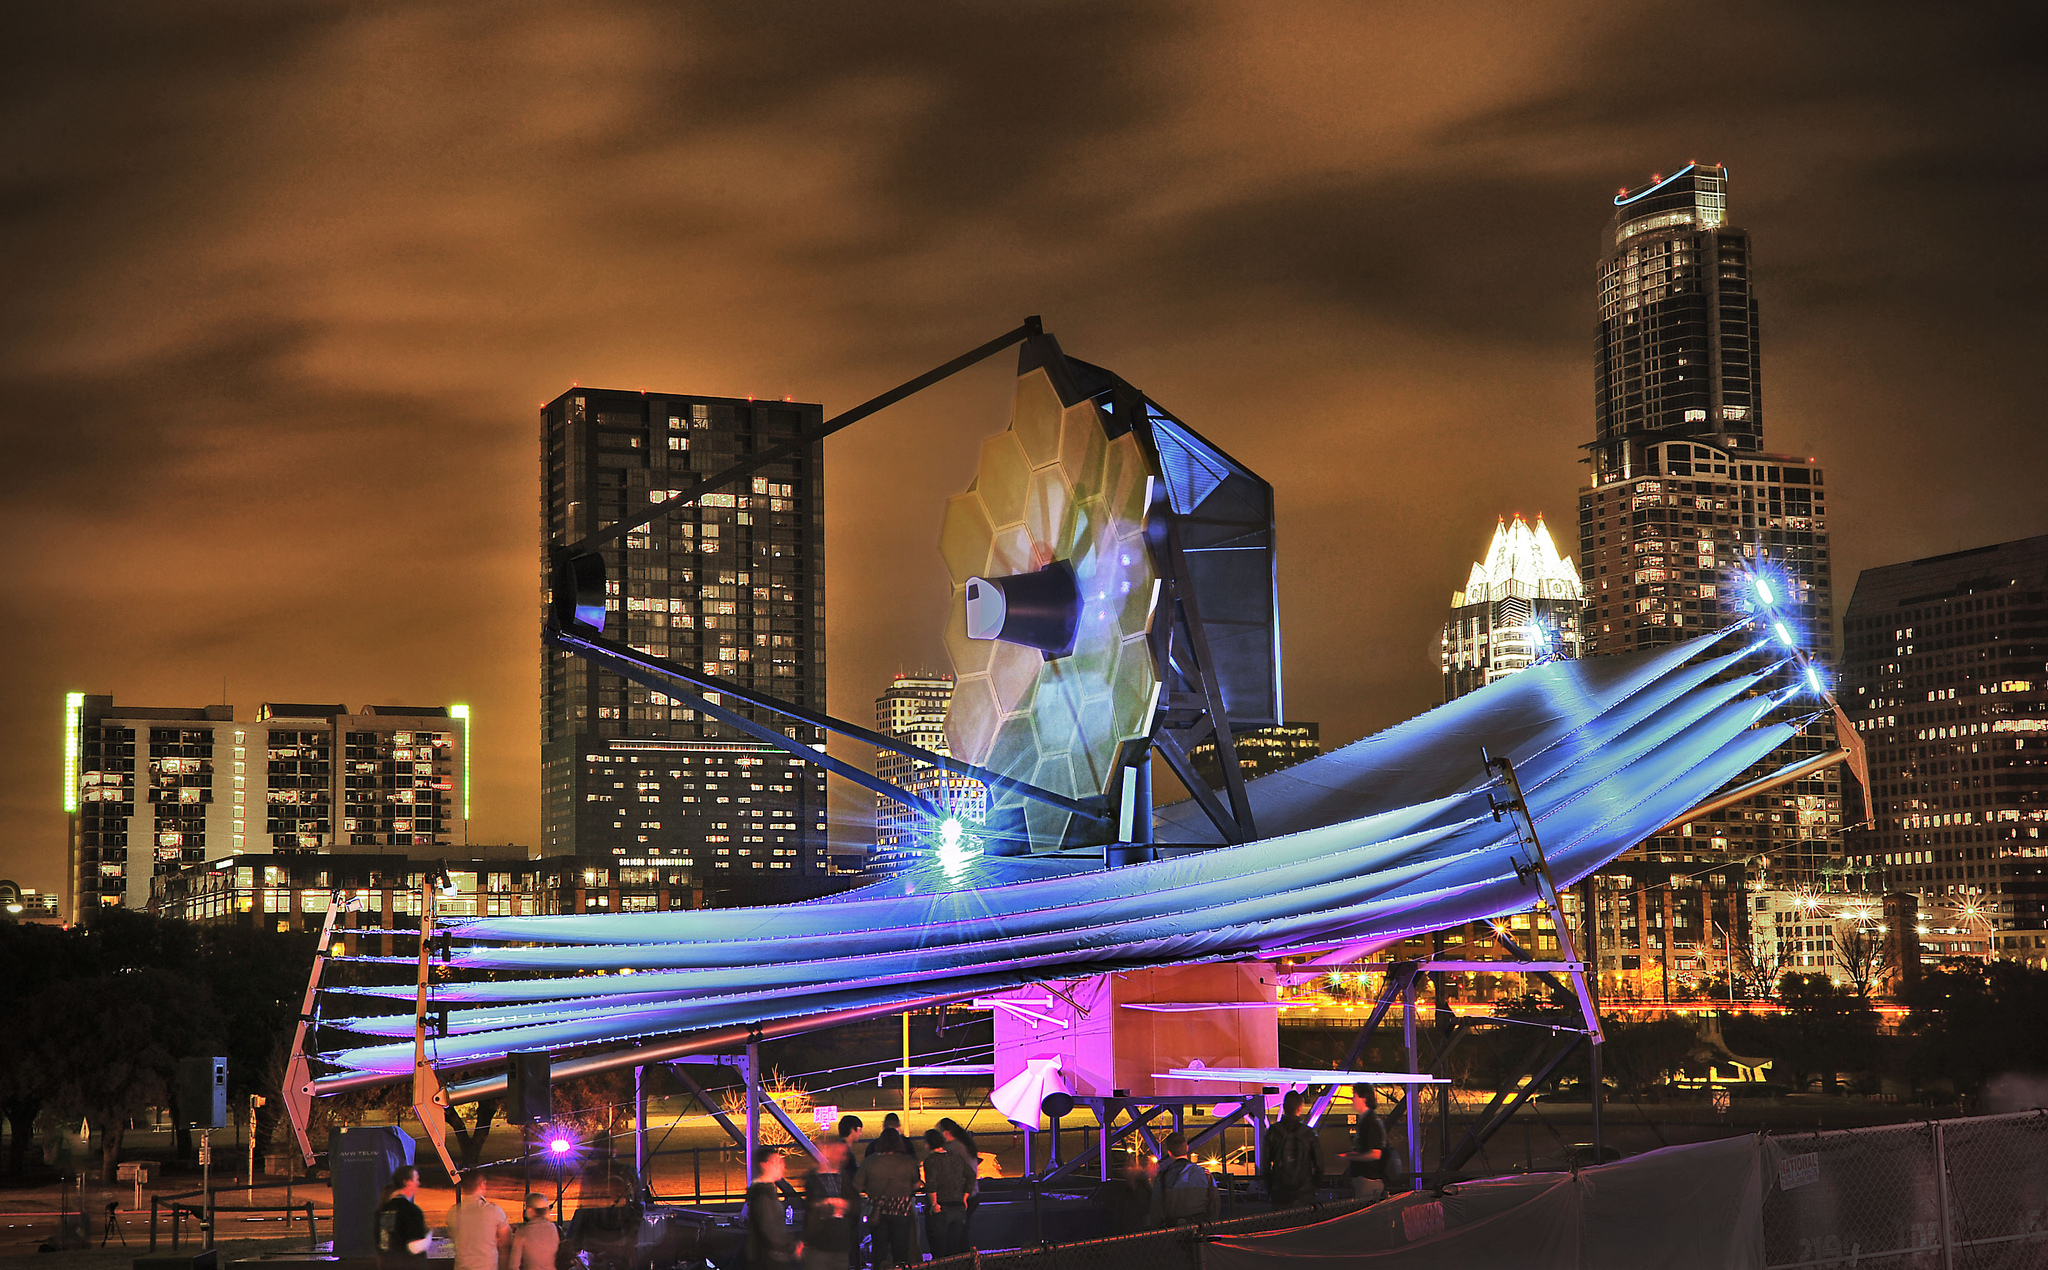 The full-scale James Webb Space Telescope model at South by Southwest in Austin. Photo Credit: NASA/Chris Gunn 